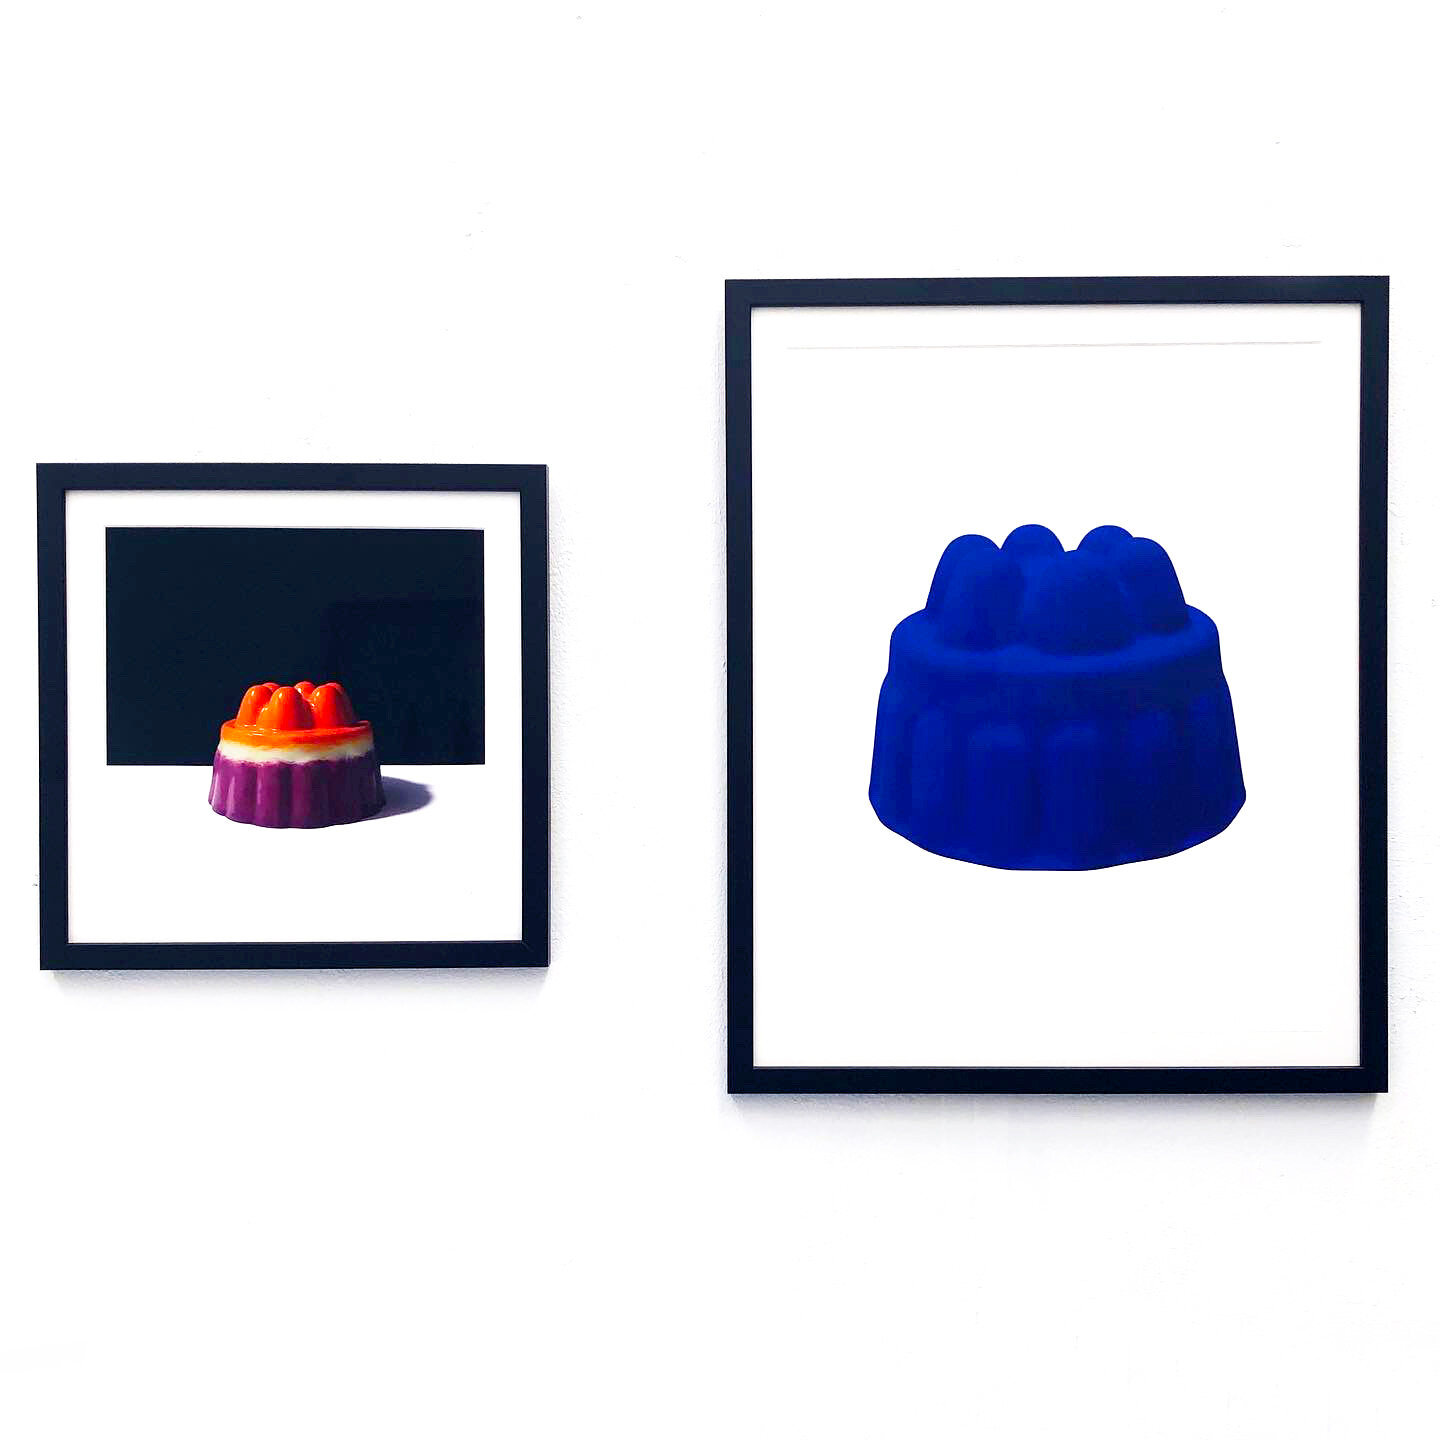 limited edition giclee prints - 'If Rothko made a Jelly' and 'After Yves' 